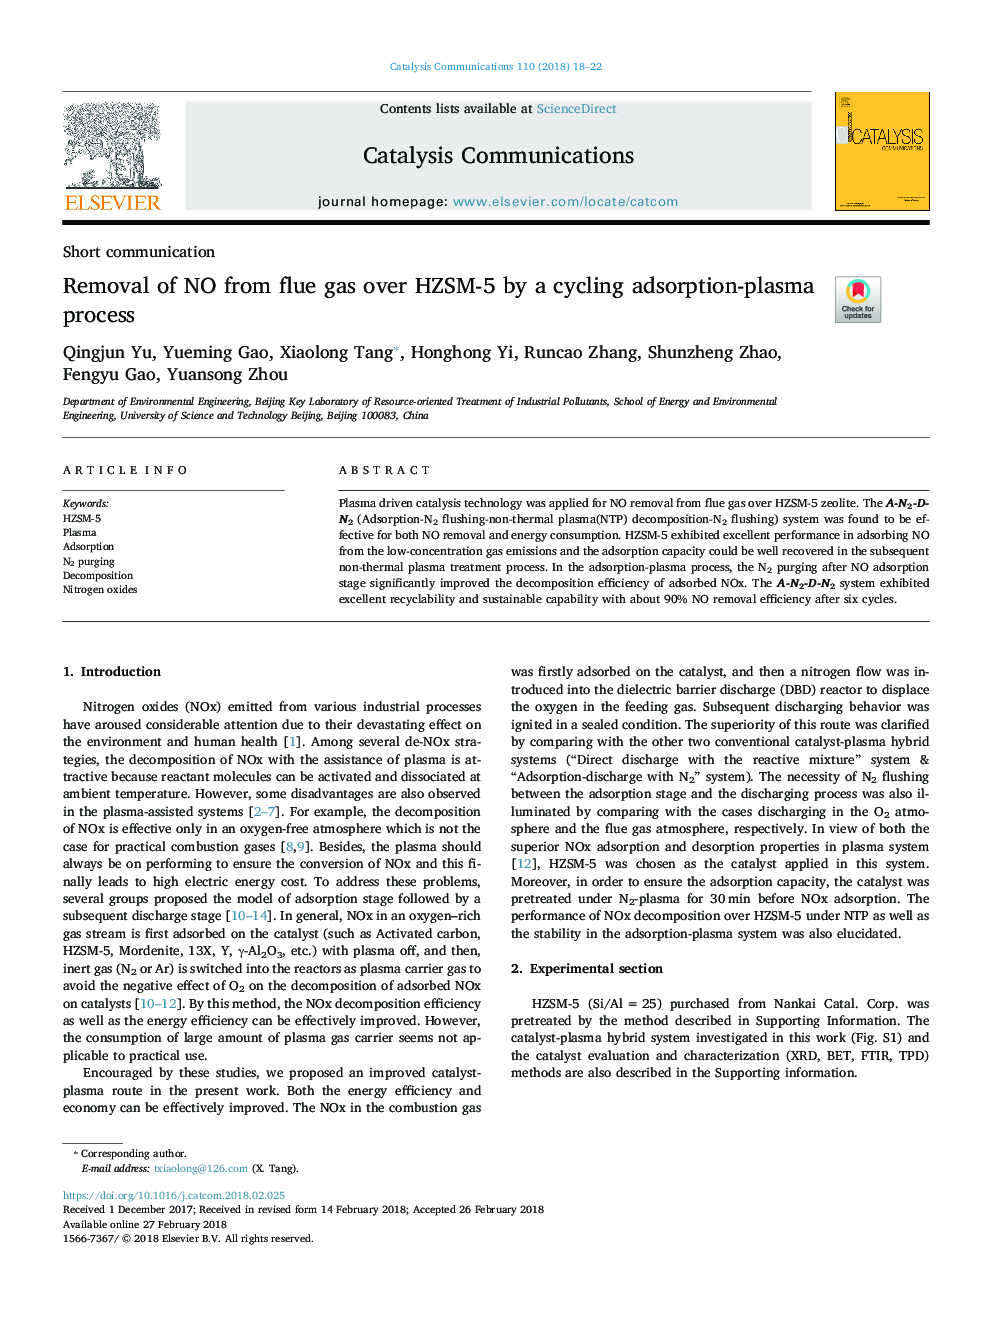 Removal of NO from flue gas over HZSM-5 by a cycling adsorption-plasma process